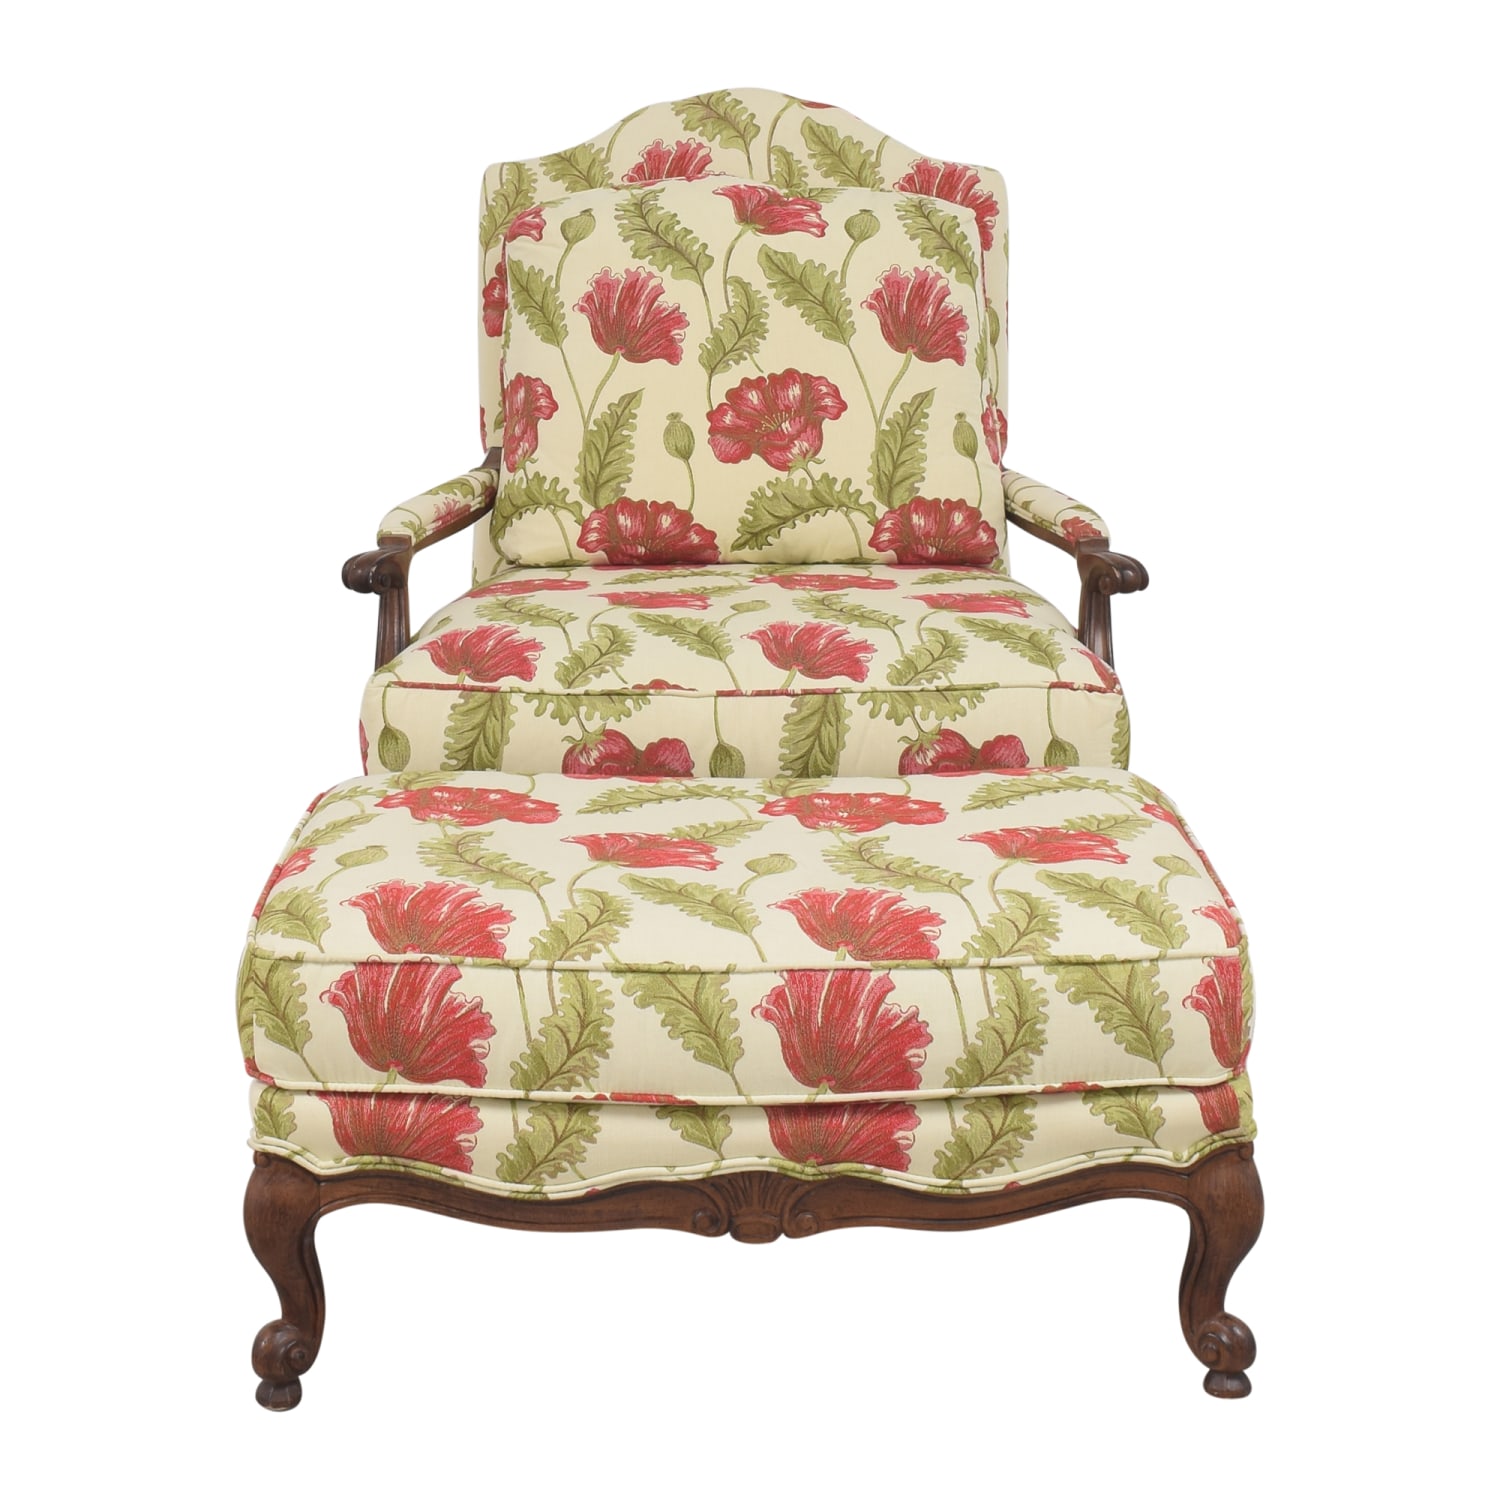 Clayton Marcus Clayton Marcus Floral Chair with Ottoman nyc